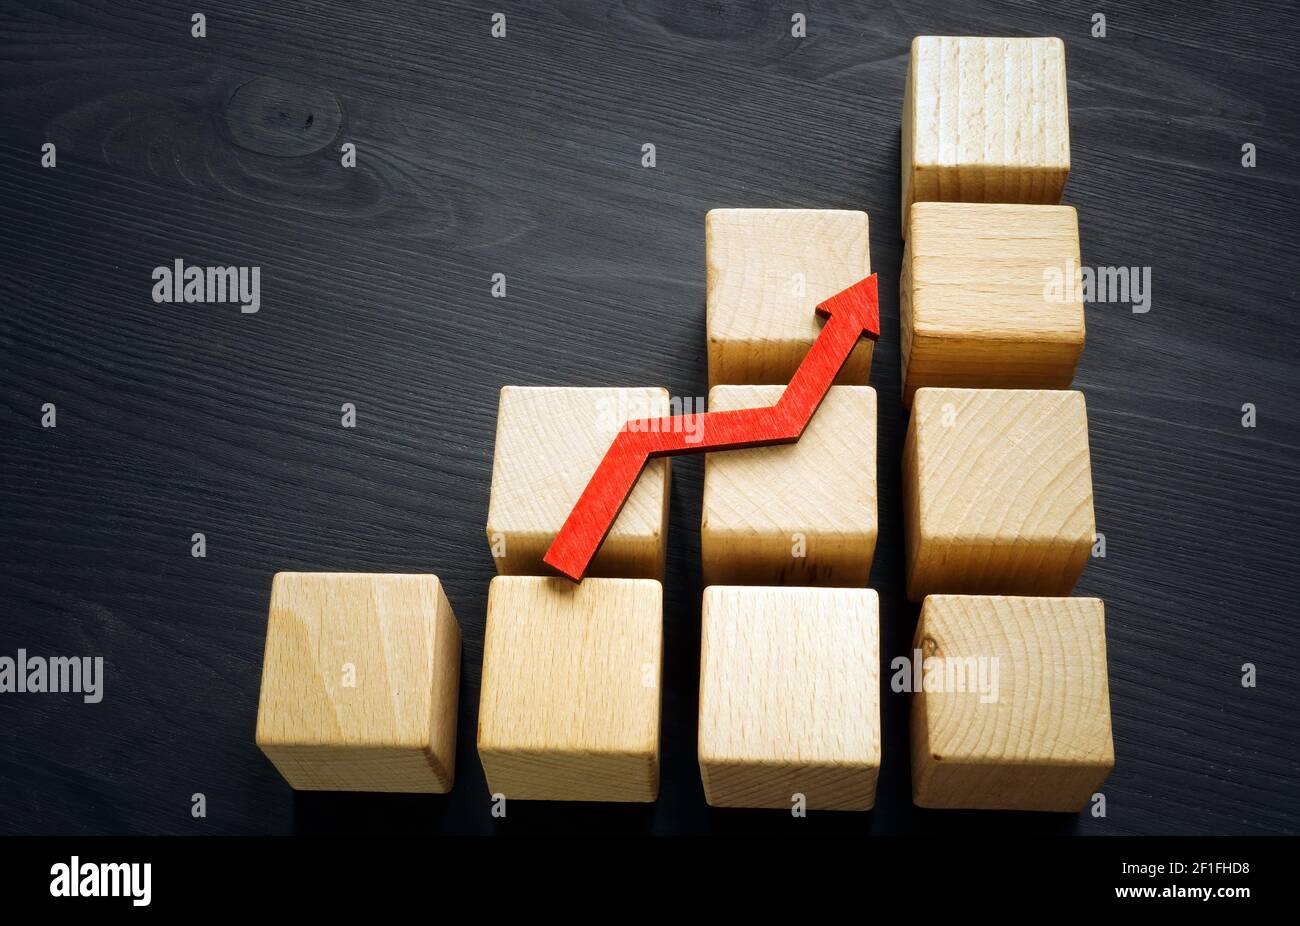 Business growth and ladder career concept. Wooden cubes and rising arrow. Stock Photo